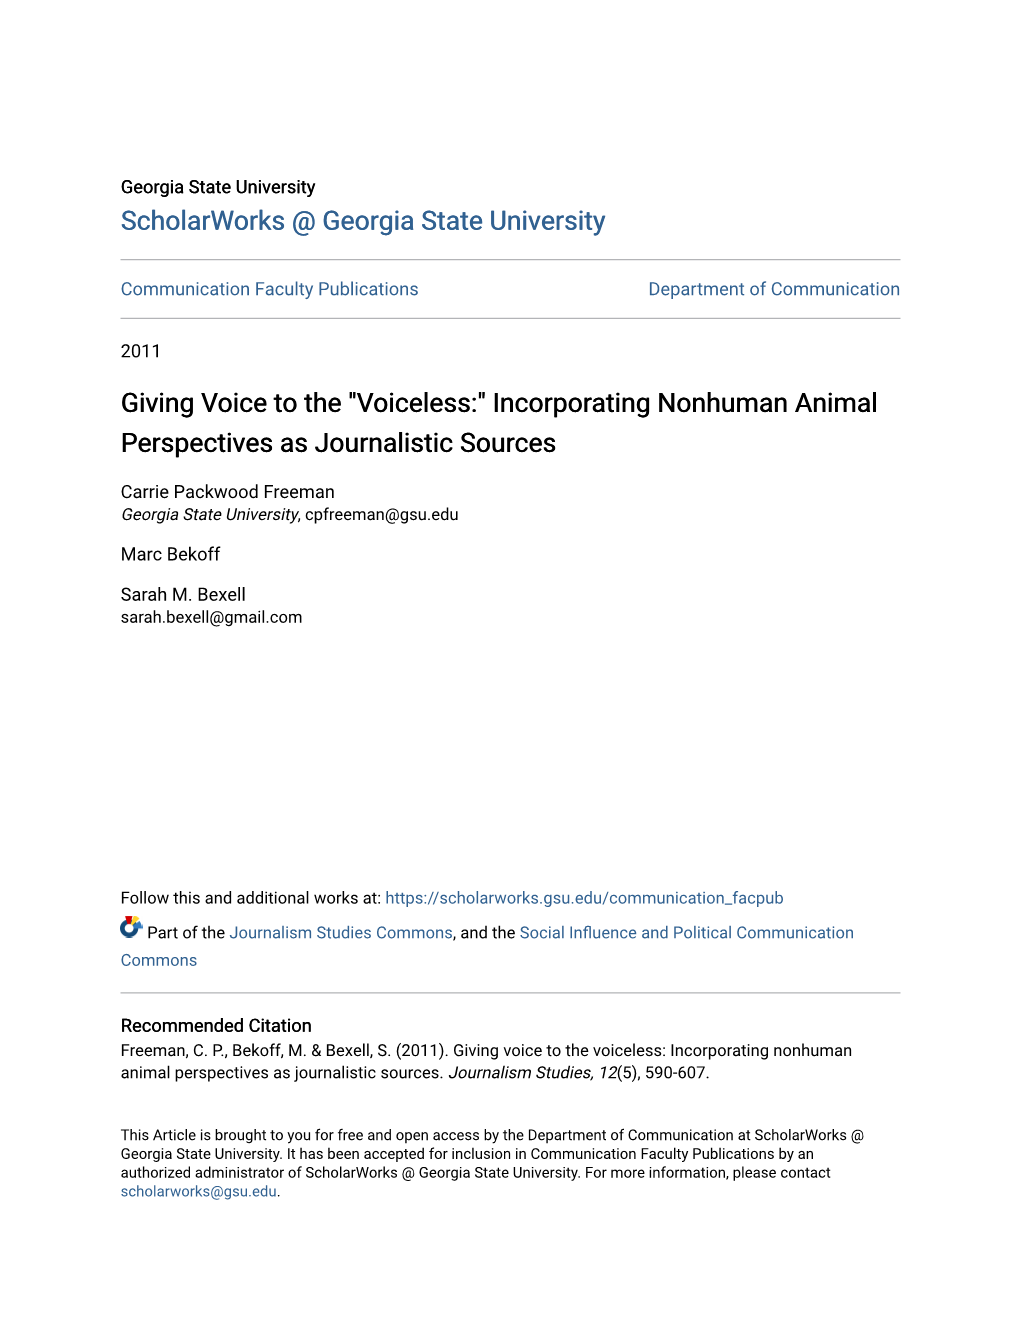 Giving Voice to the "Voiceless:" Incorporating Nonhuman Animal Perspectives As Journalistic Sources